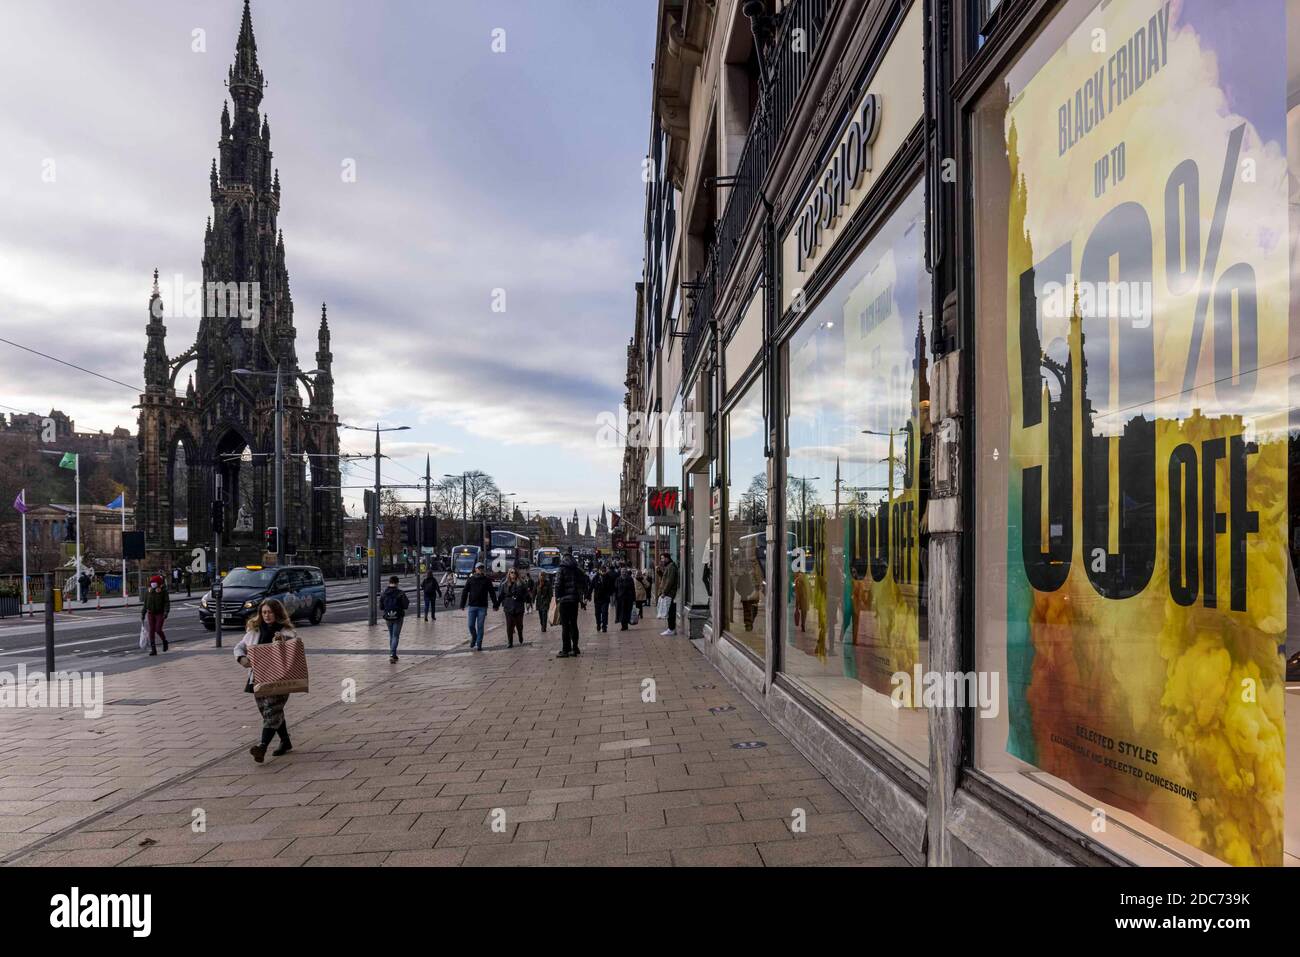 Edinburgh, UK. 19 November, 2020 Pictured: The Top Man store on Edinburgh’s Princes Street promotes its Black Friday sale. Footfall in Edinburgh is much reduced as a result of being in Level 3 lockdown. Credit: Rich Dyson/Alamy Live News Stock Photo